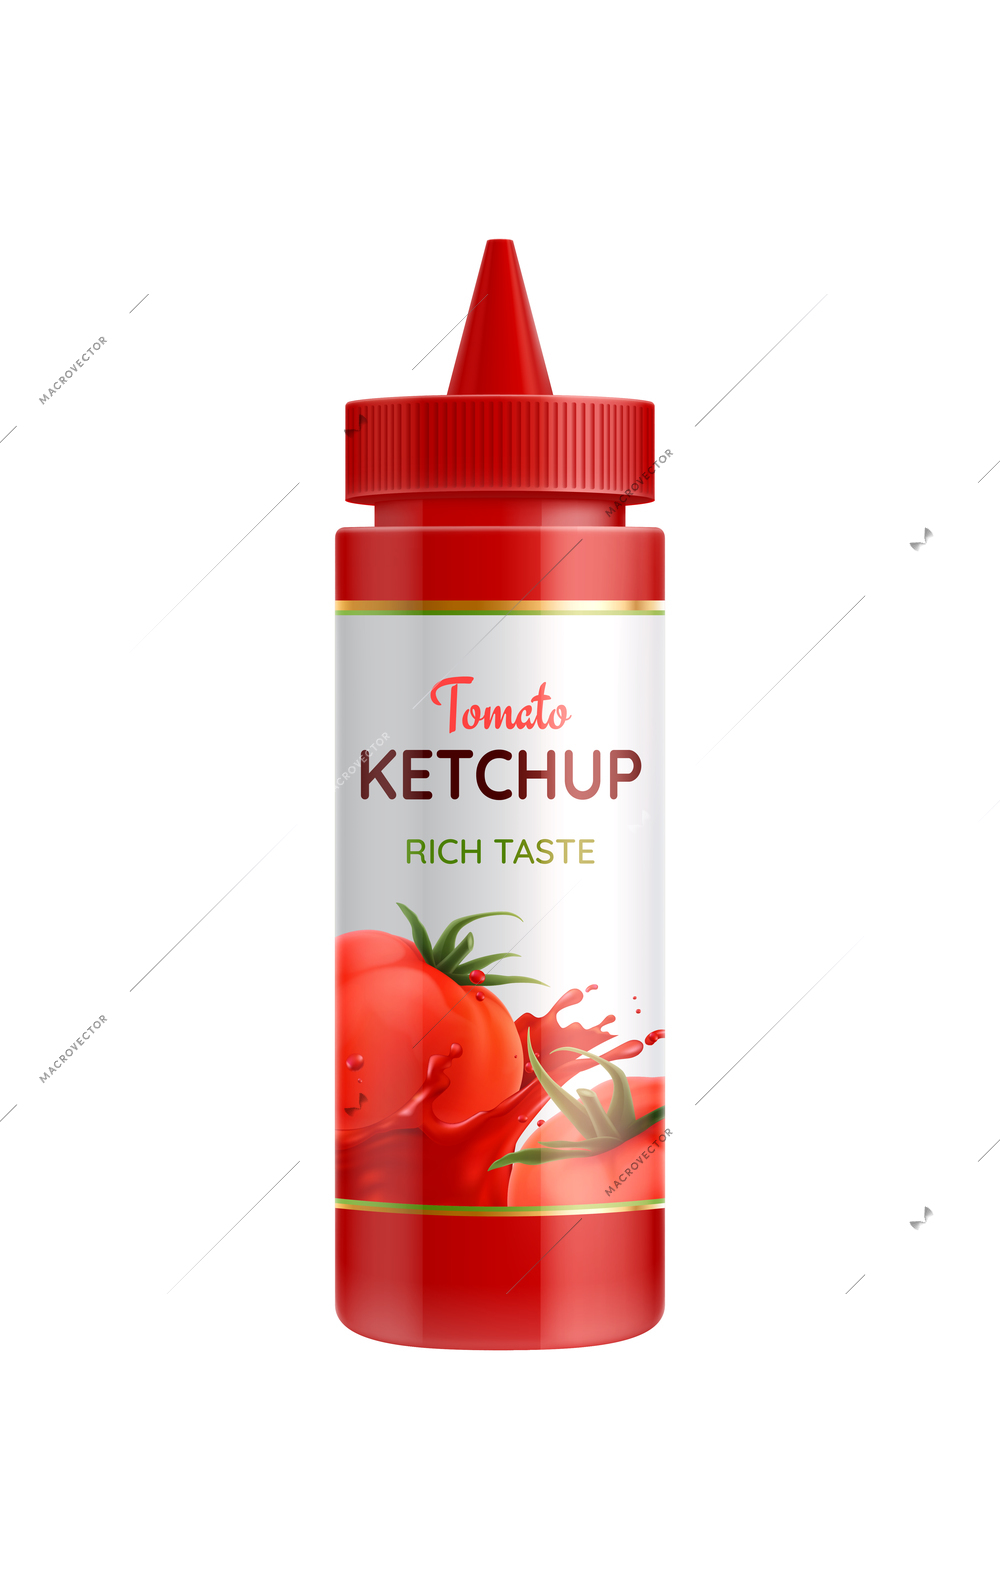 Realistic red sauce bottle with tomato ketchup on white background vector illustration